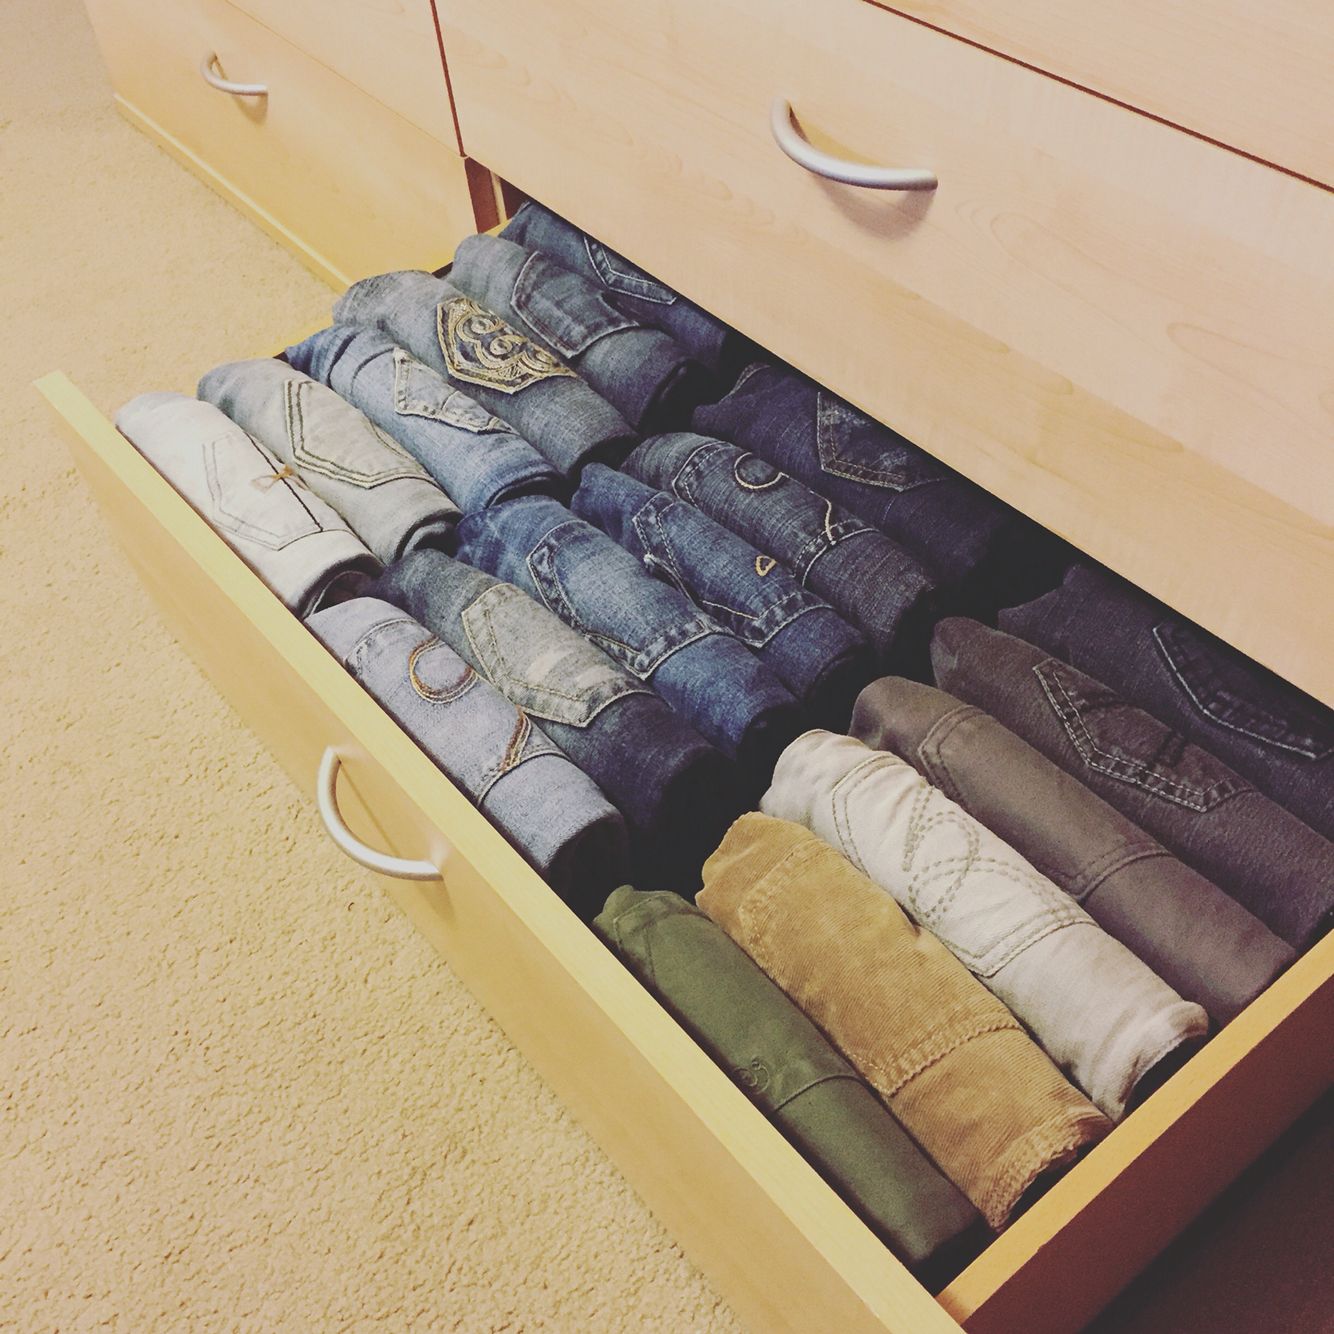 How To Store Jeans